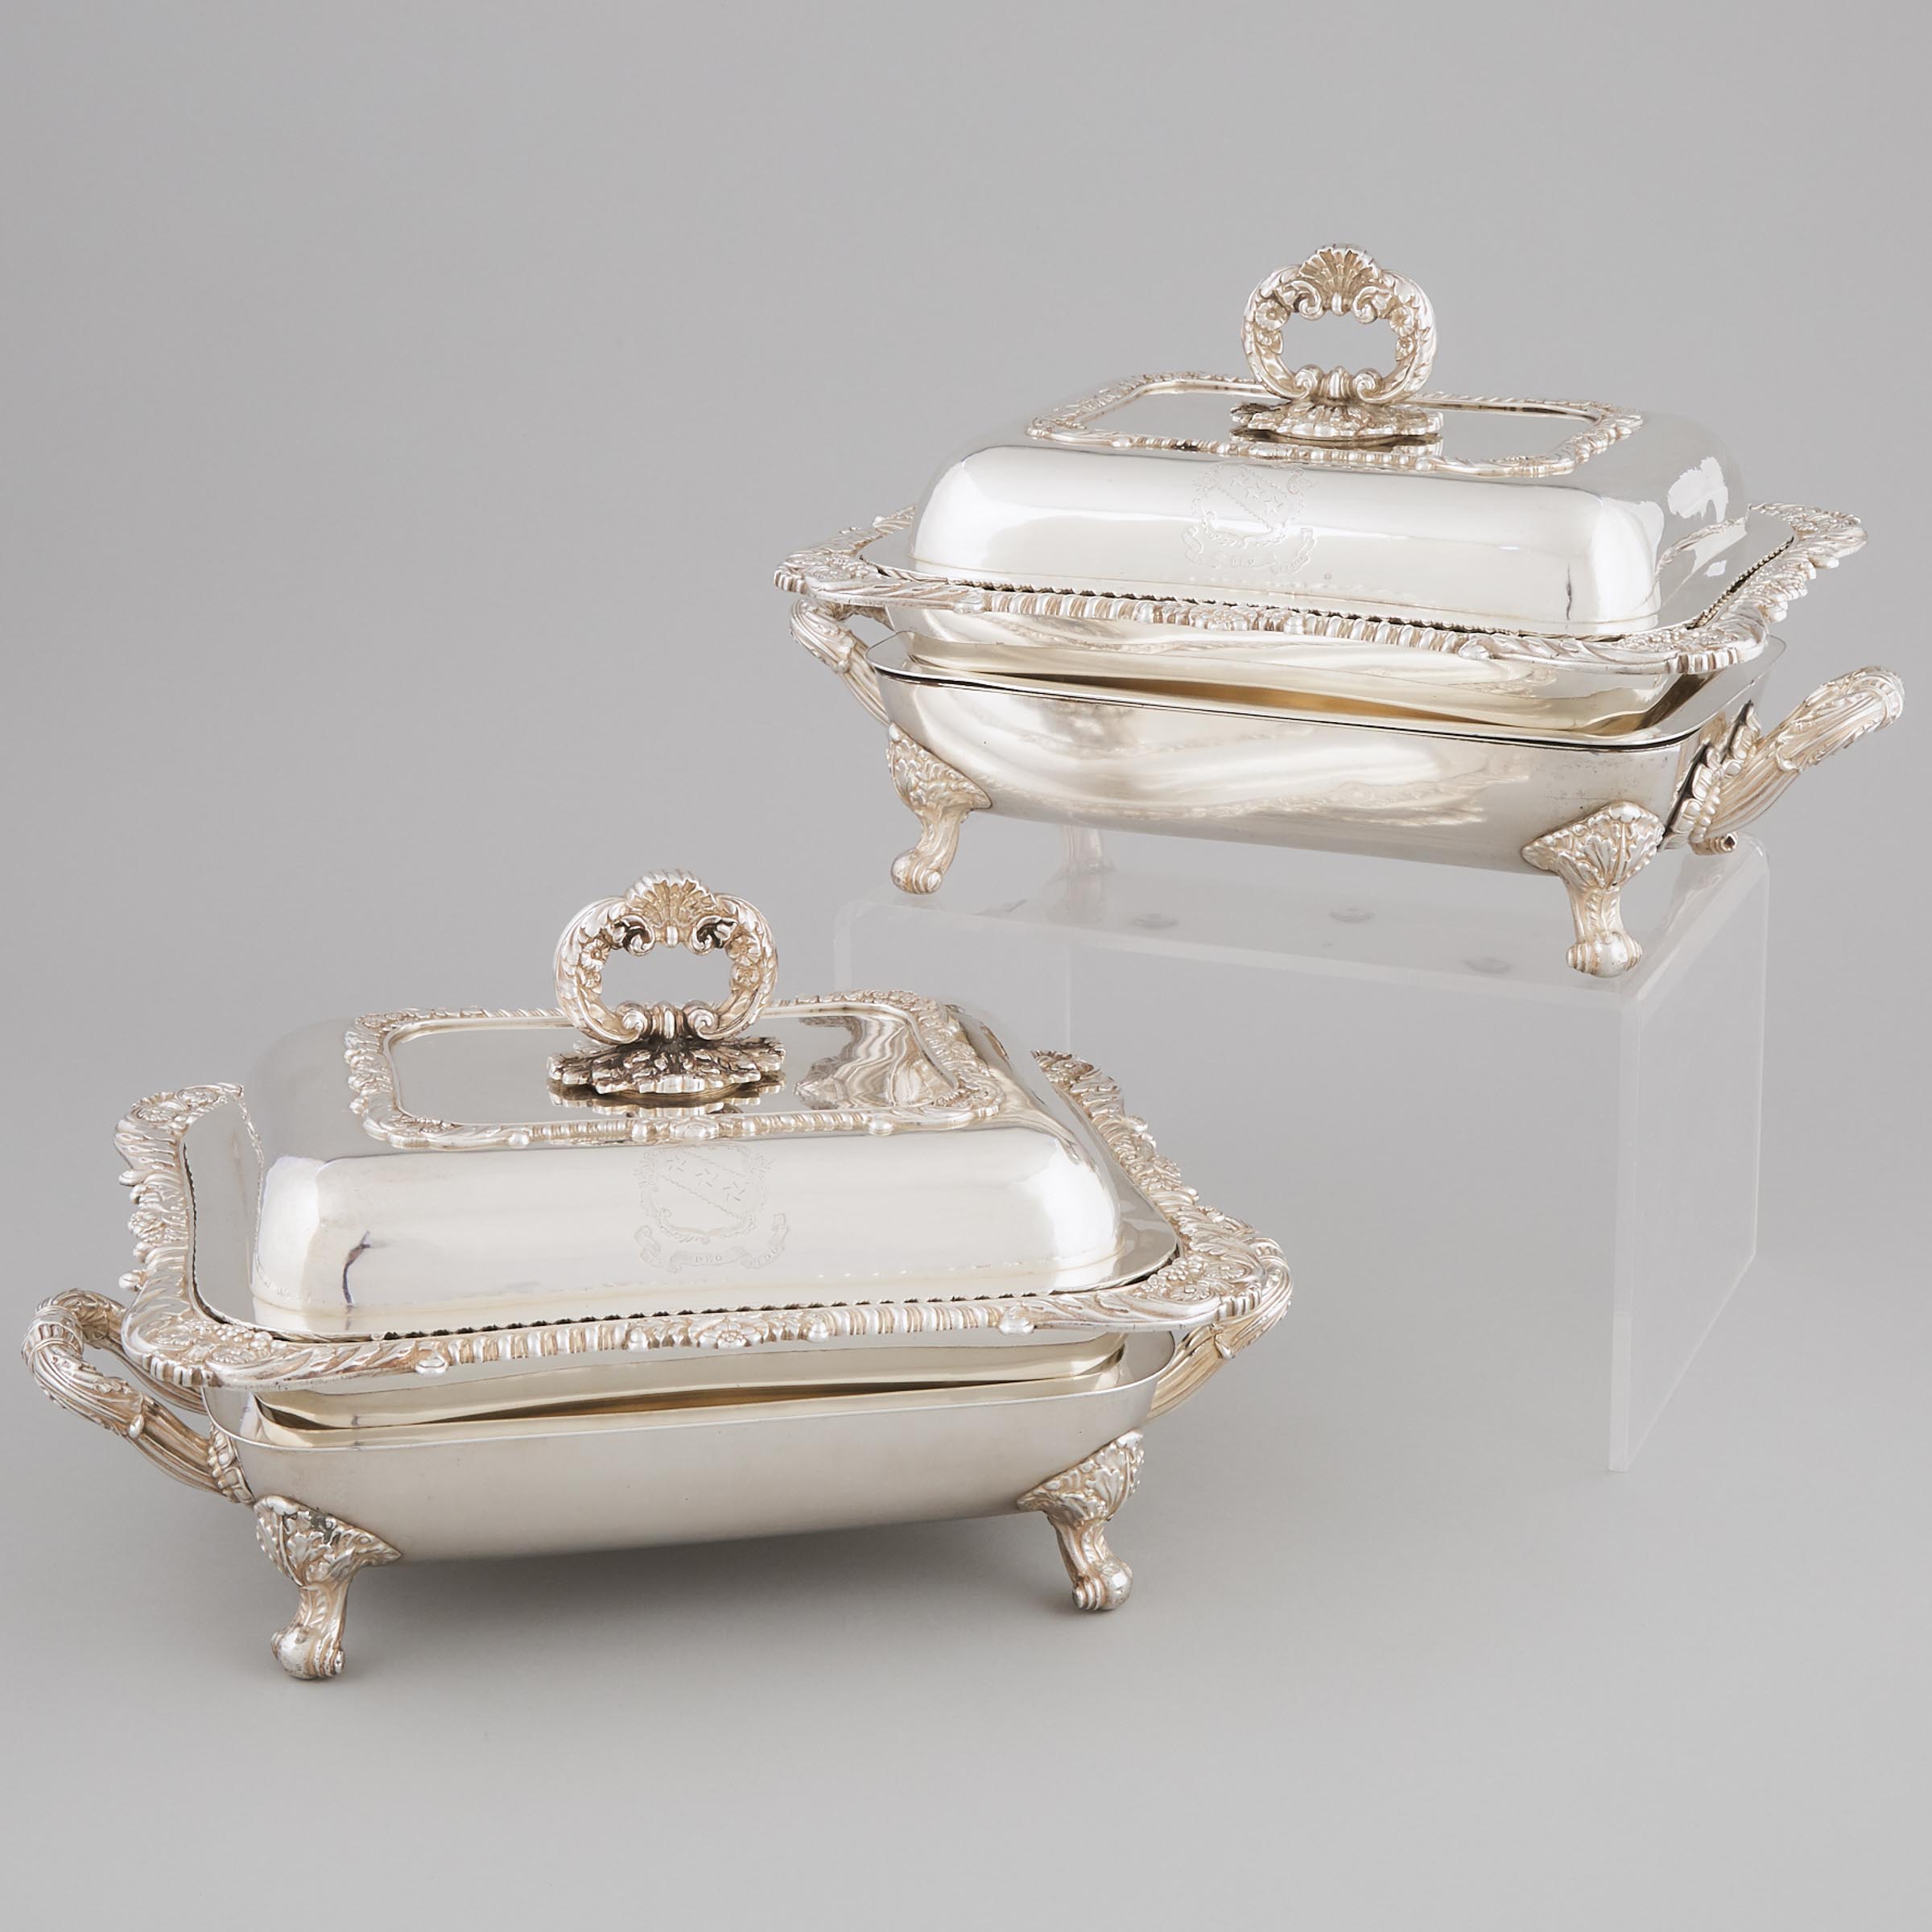 Pair of George III Silver Rectangular Covered Entrée Dishes with Old Sheffield Plate Warming Stands, Joseph Craddock & William Ker Reid, London, 1818